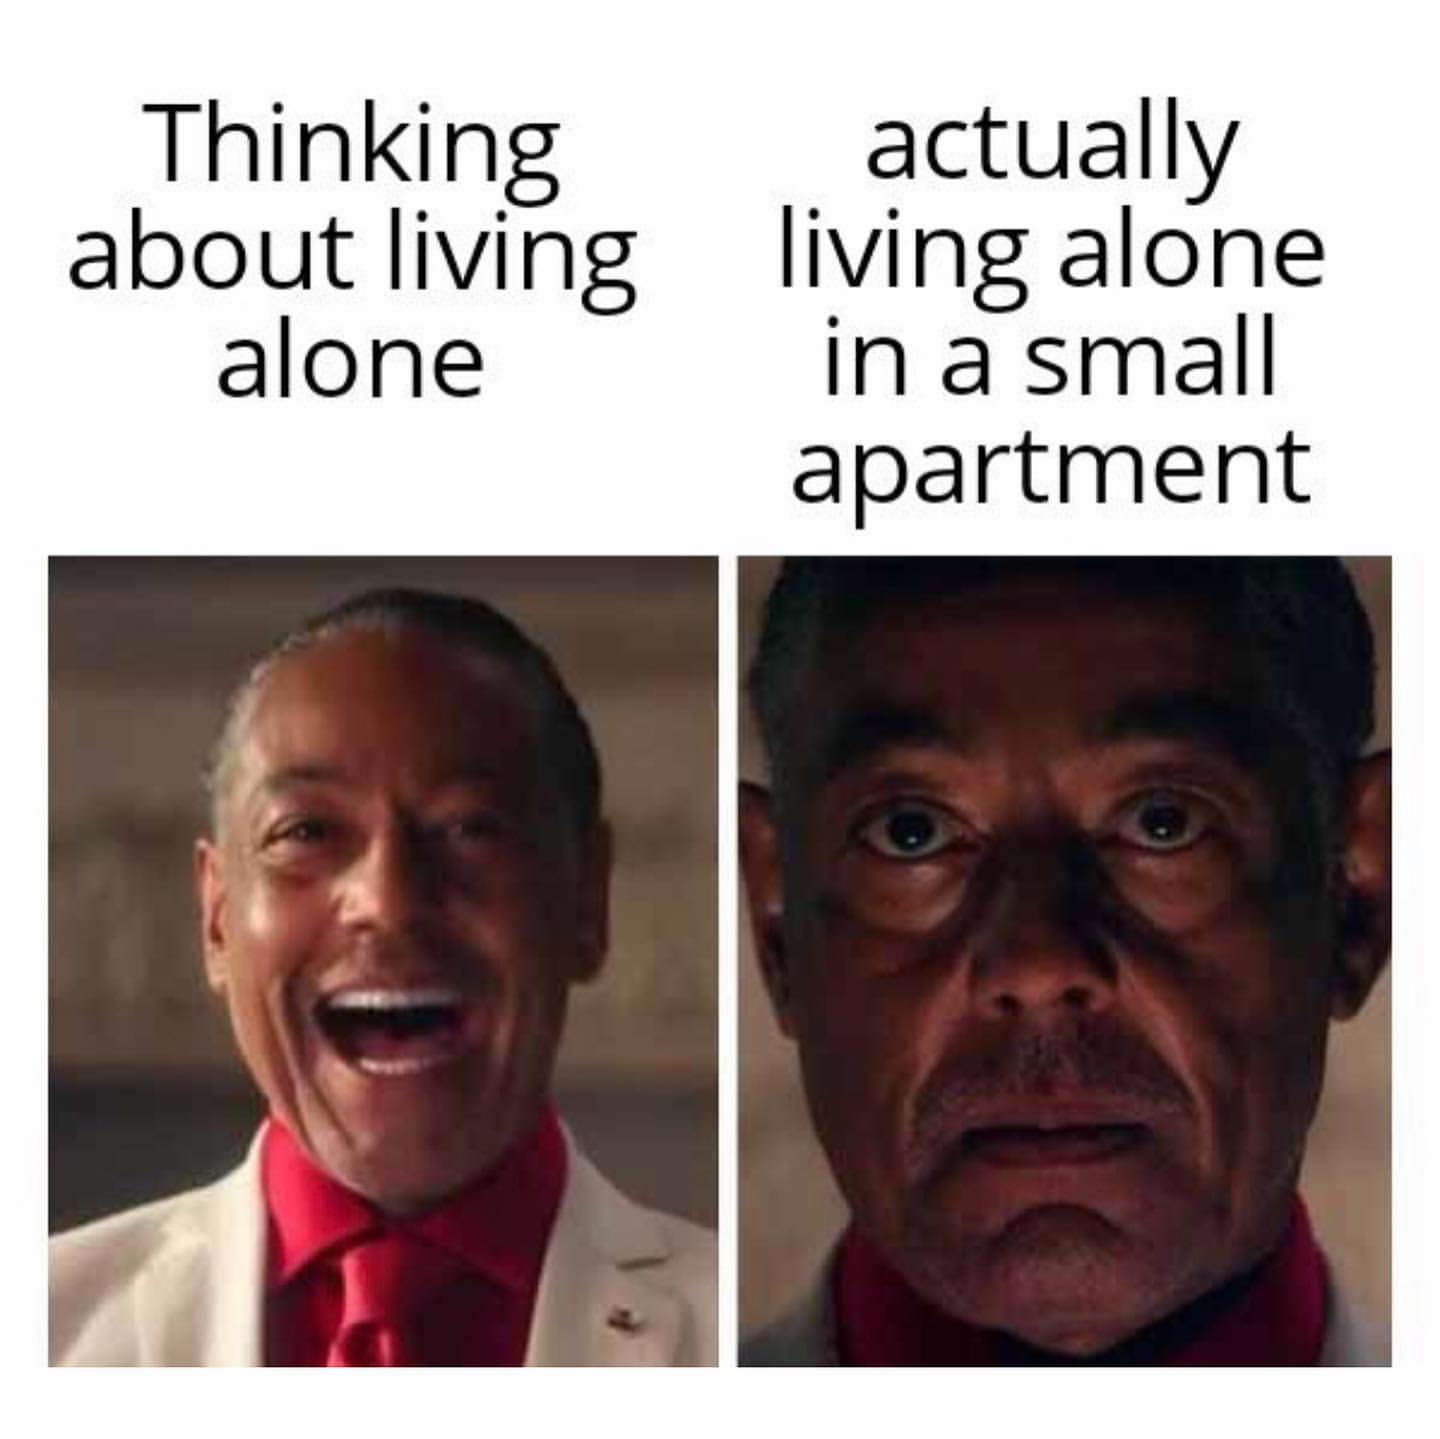 Thinking about living alone actually living alone in a small apartment.